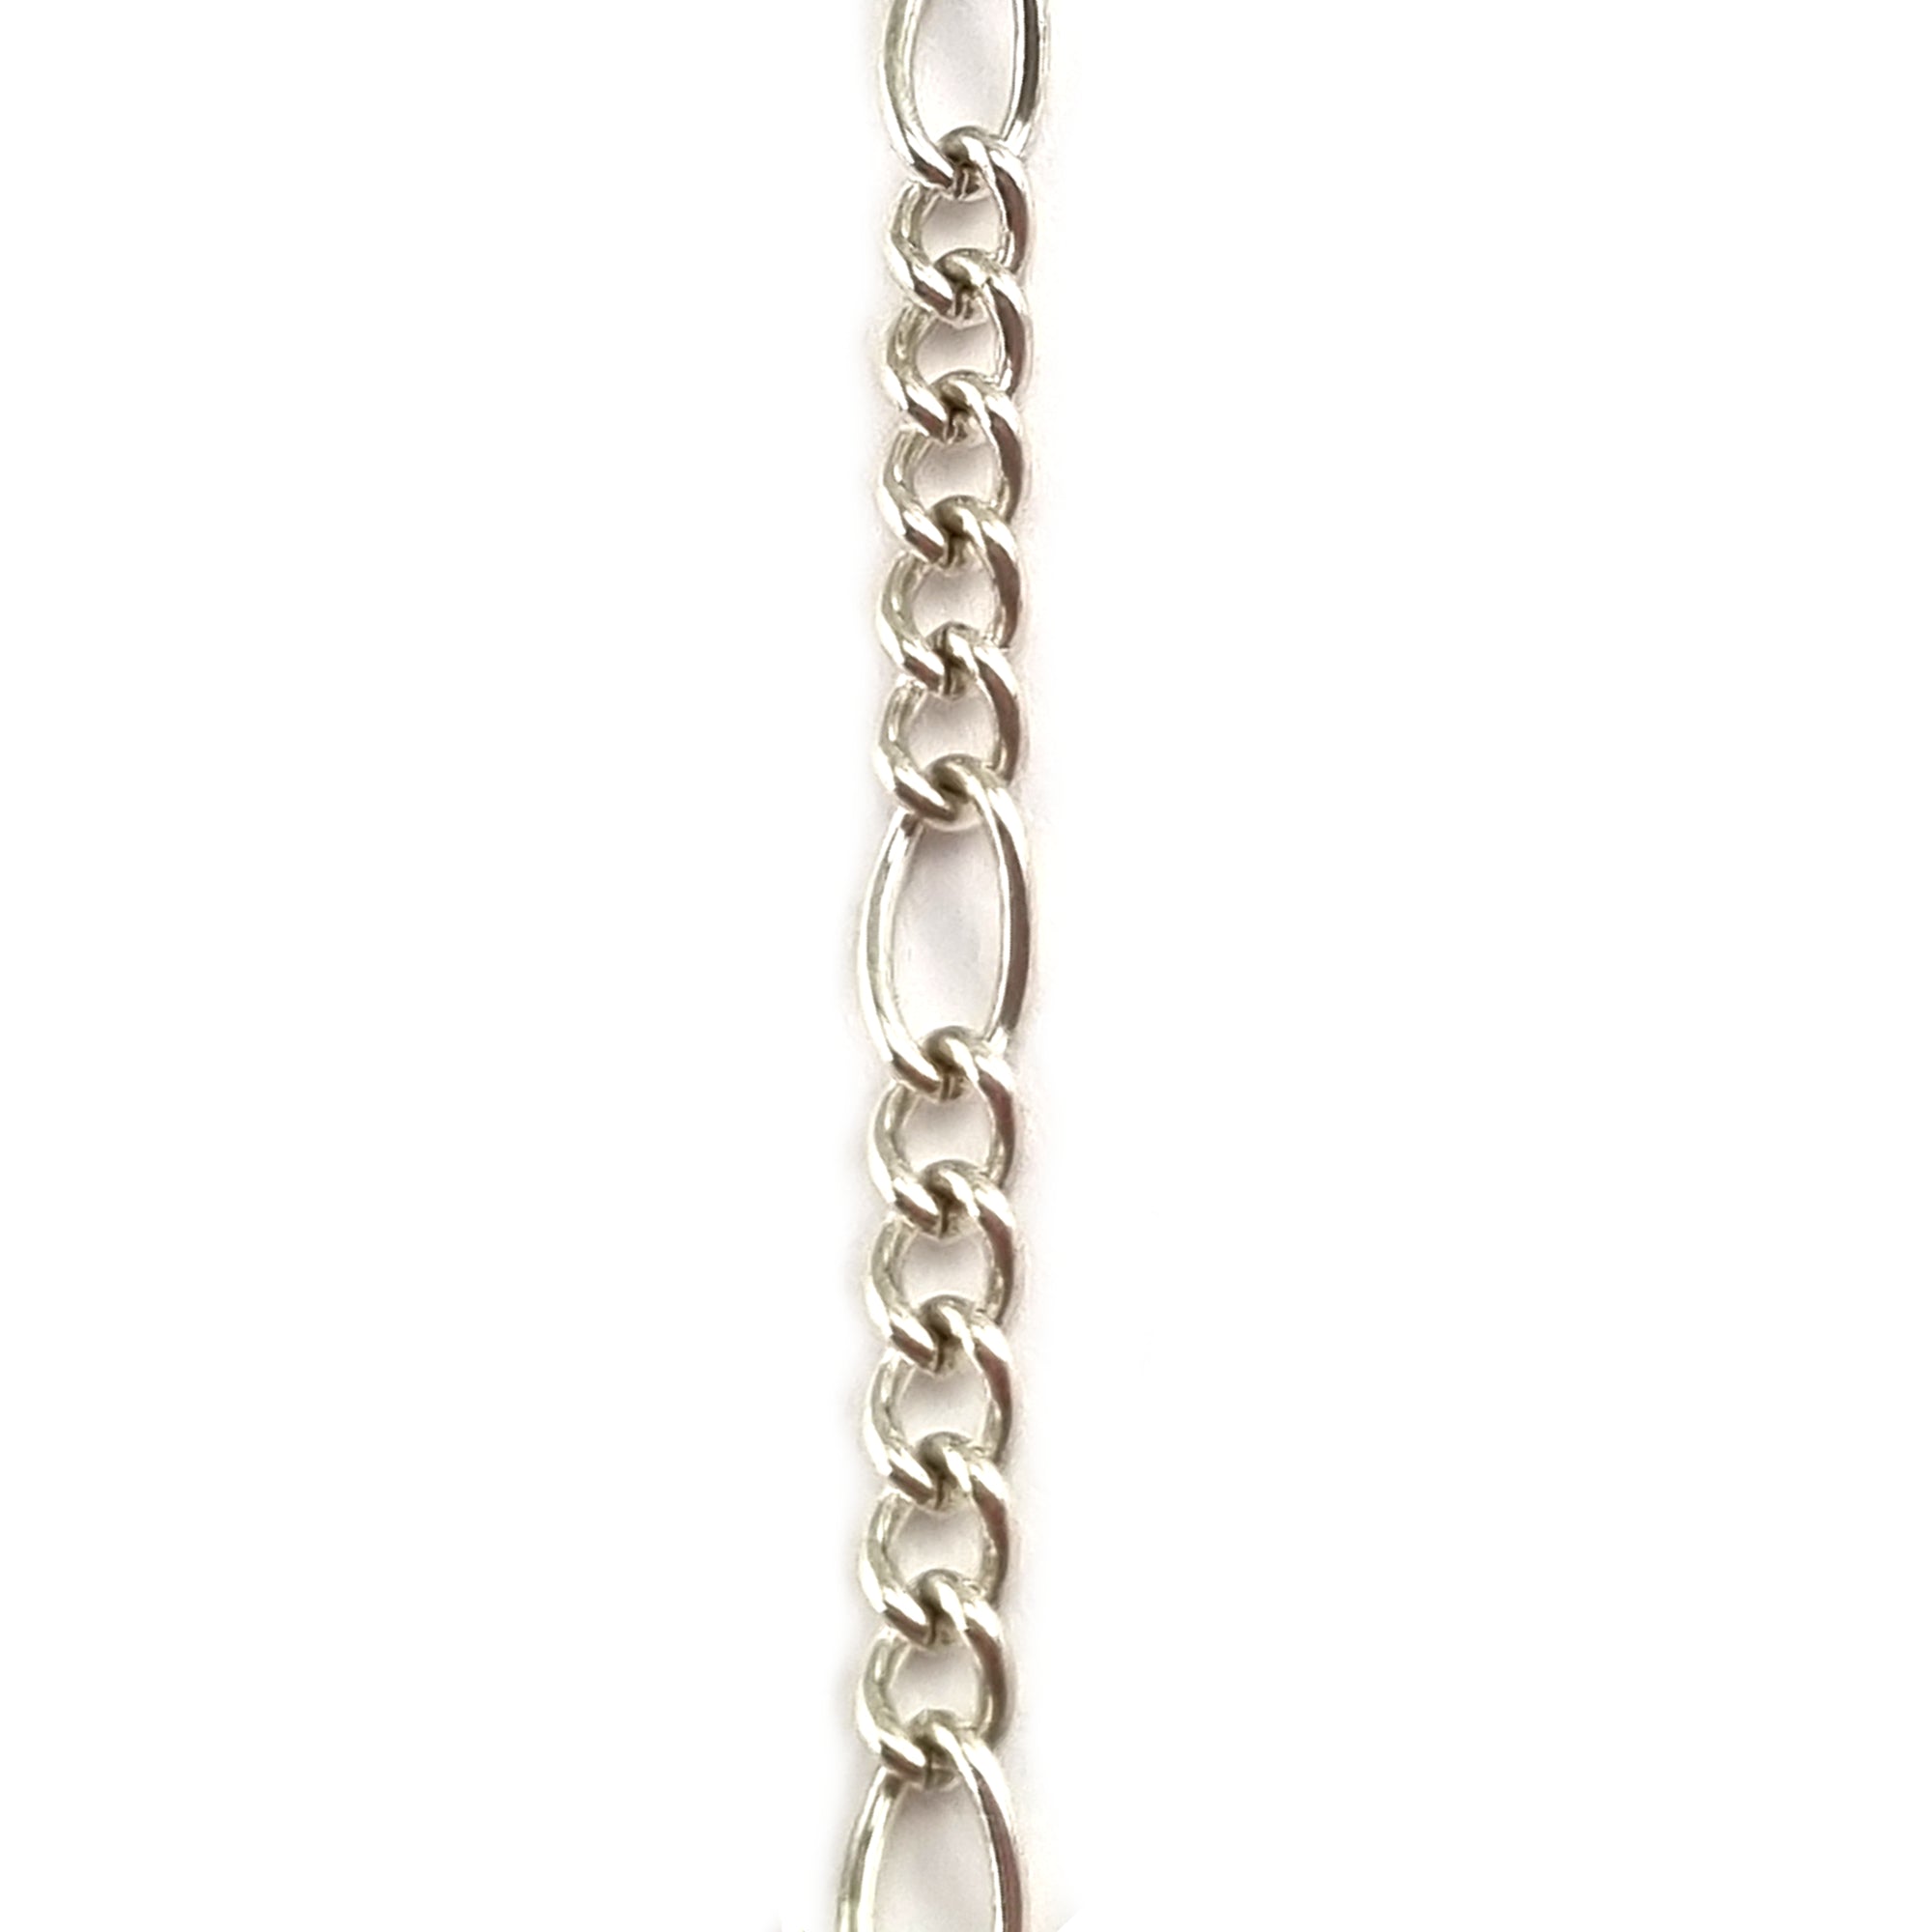 Figaro Curb Chain Silver Plated. Shop Jewellery Chain online. Australia wide shipping. Chain.com.au